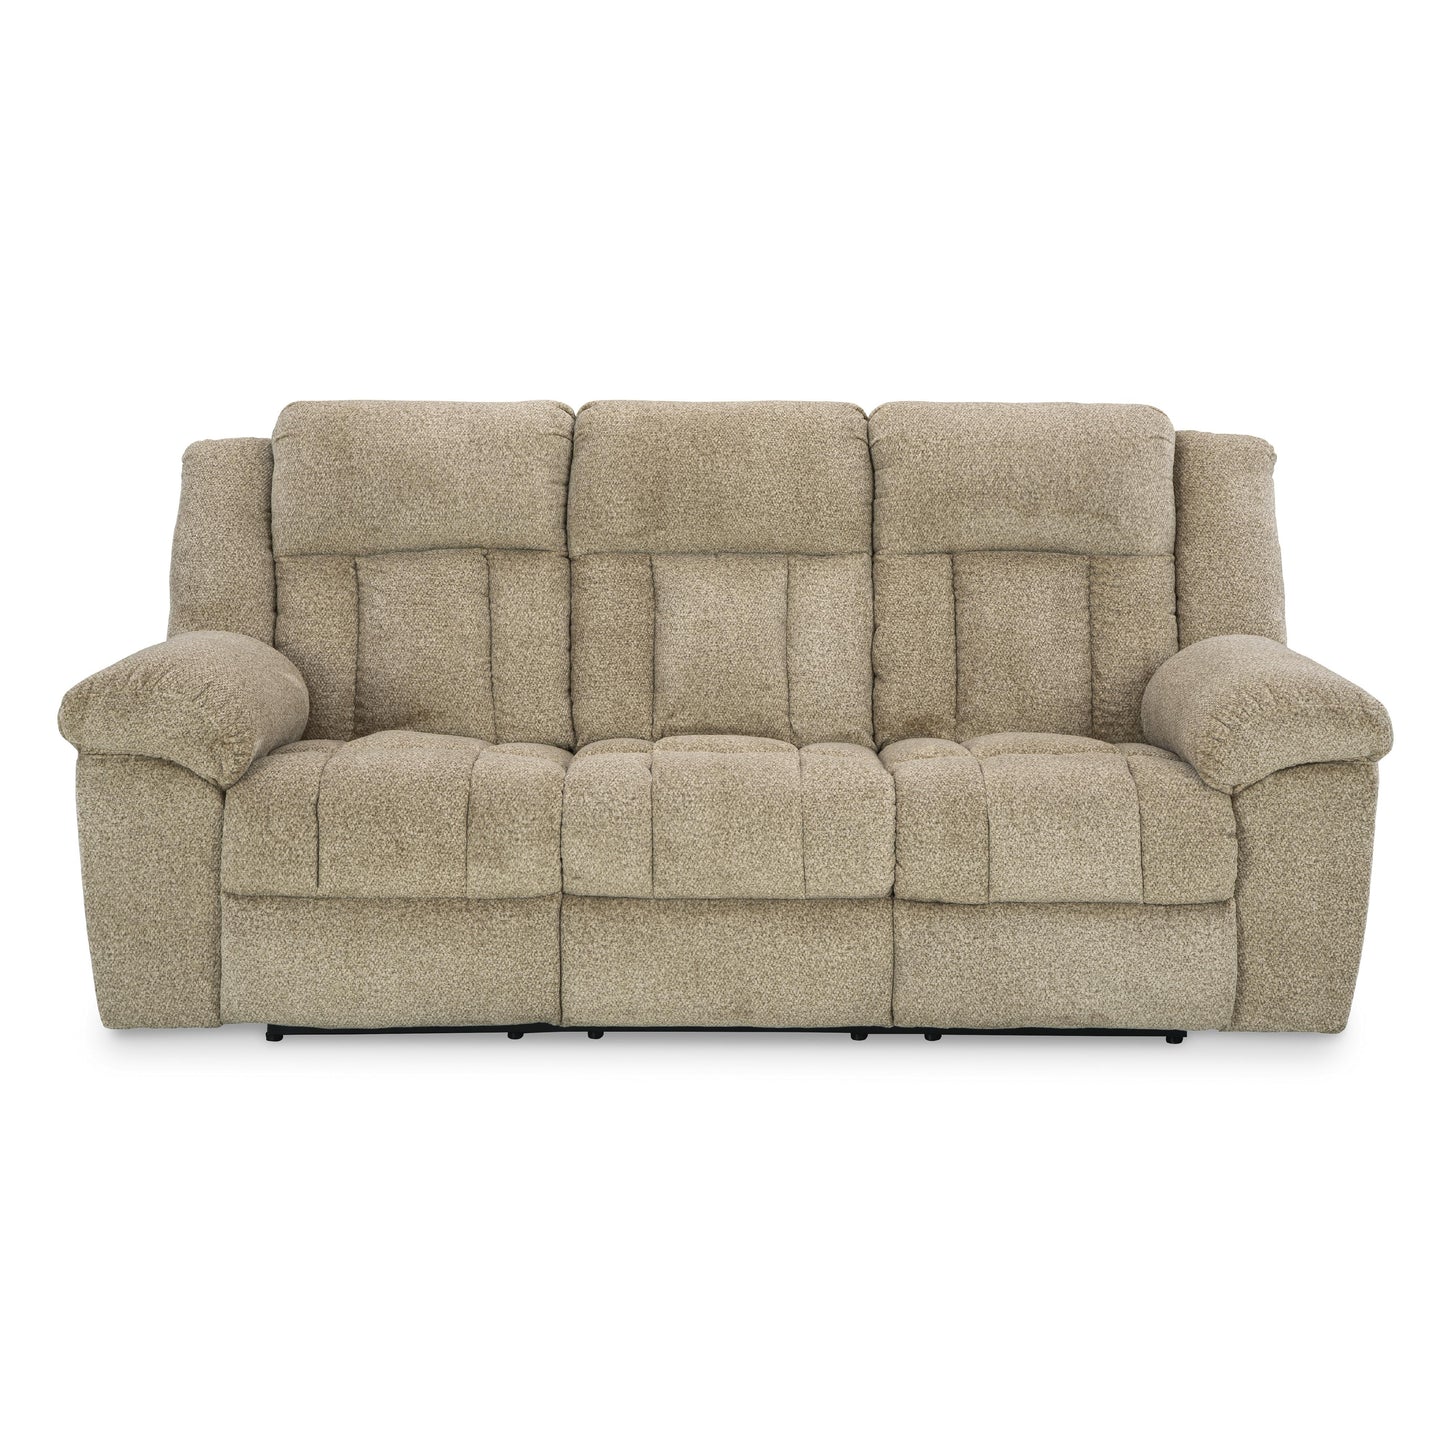 Signature Design by Ashley Tip-Off Power Reclining Sofa 6930515 IMAGE 4